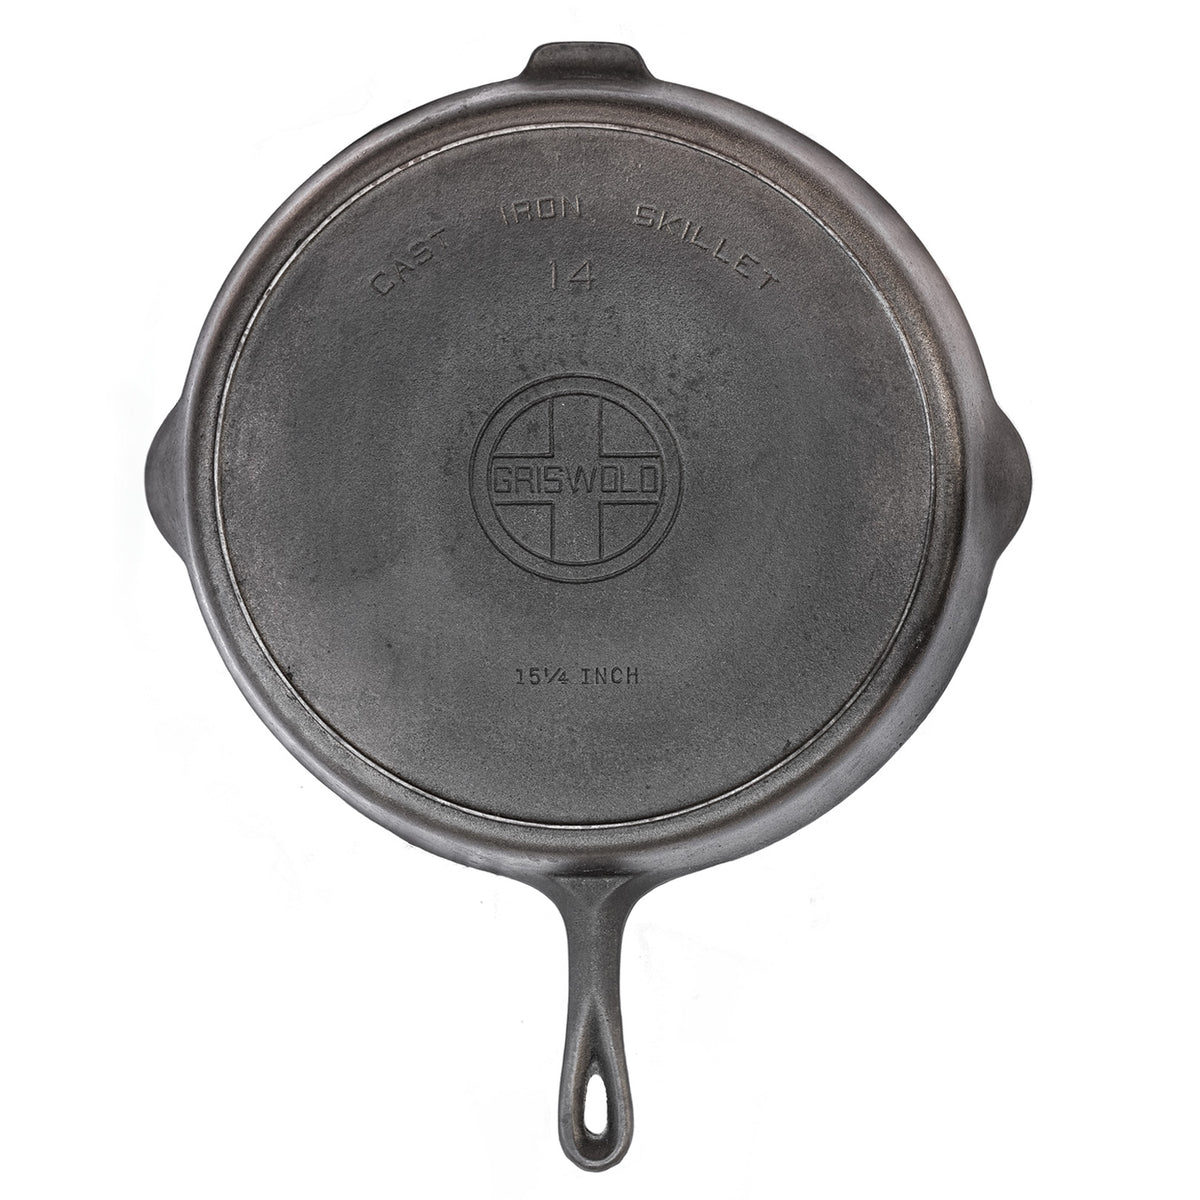 Wagner #14 Cast Iron Skillet - From Griswold Mold